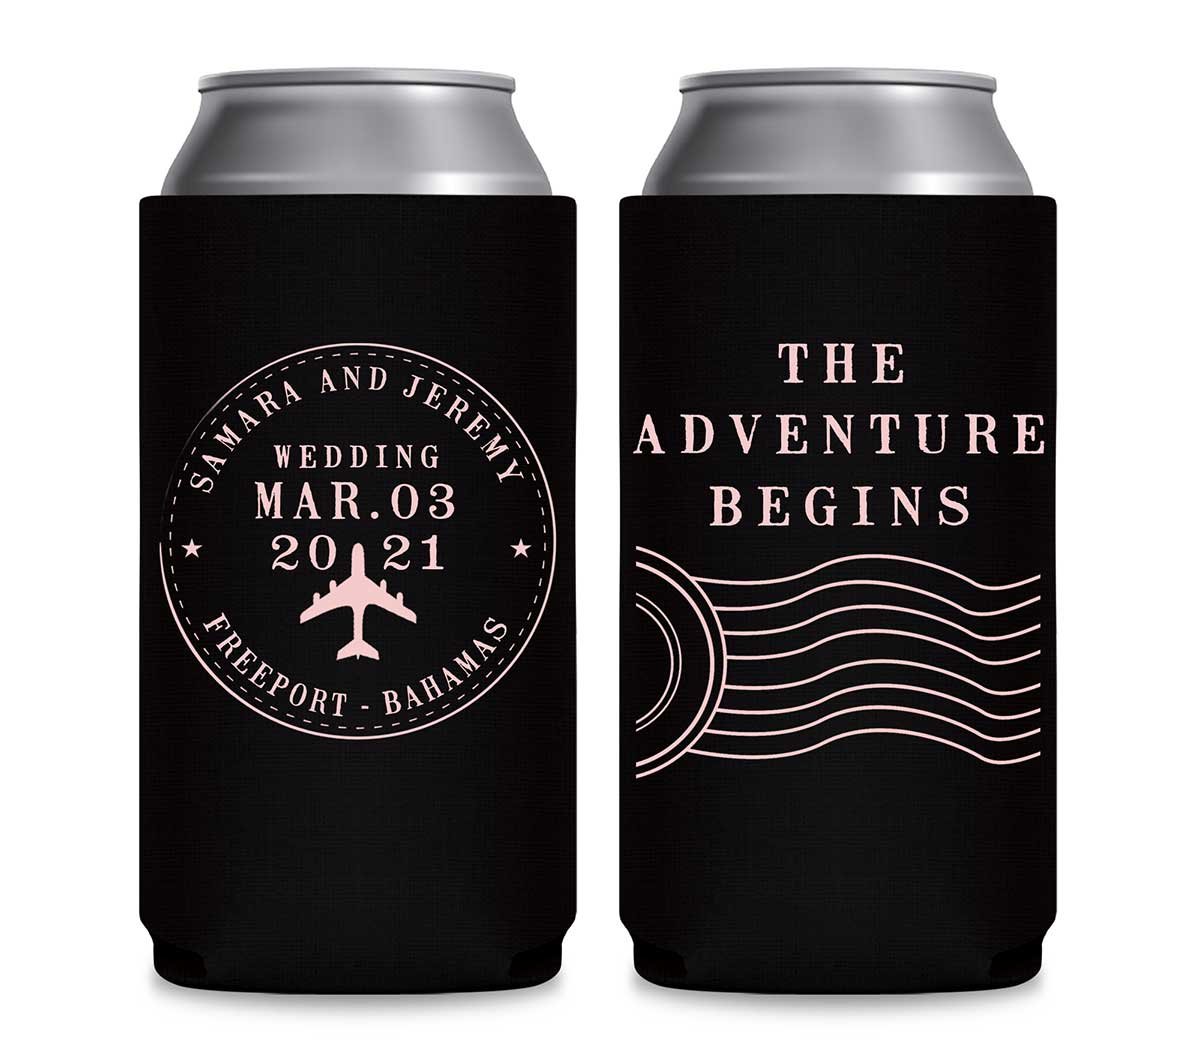 The Adventure Begins 2A Travel Stamp Foldable 12 oz Slim Can Koozies Wedding Gifts for Guests